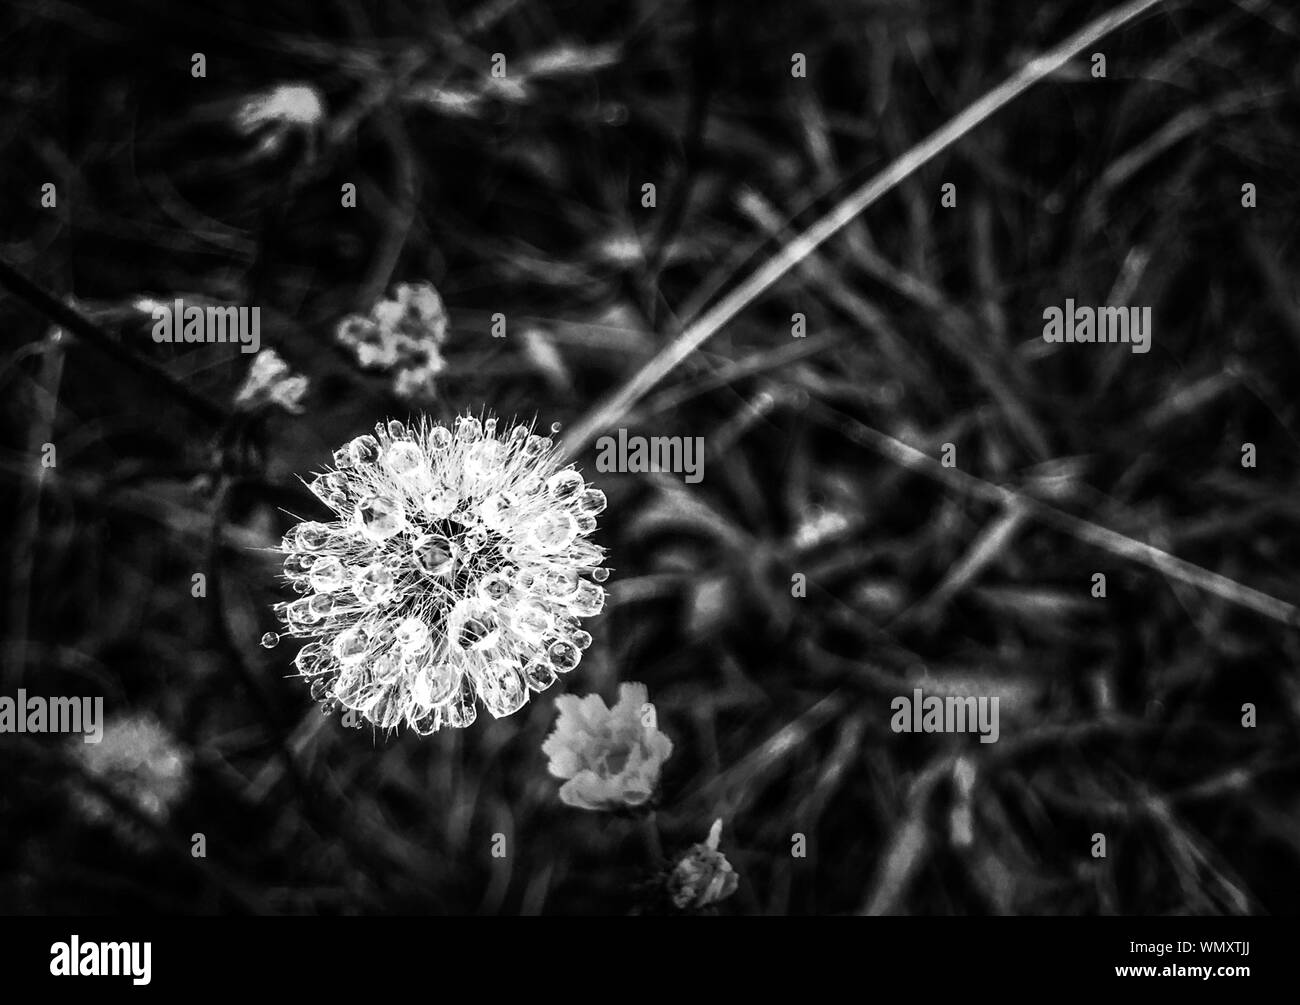 Glistening dew drops cover a dandelion seed head in the early morning light Stock Photo